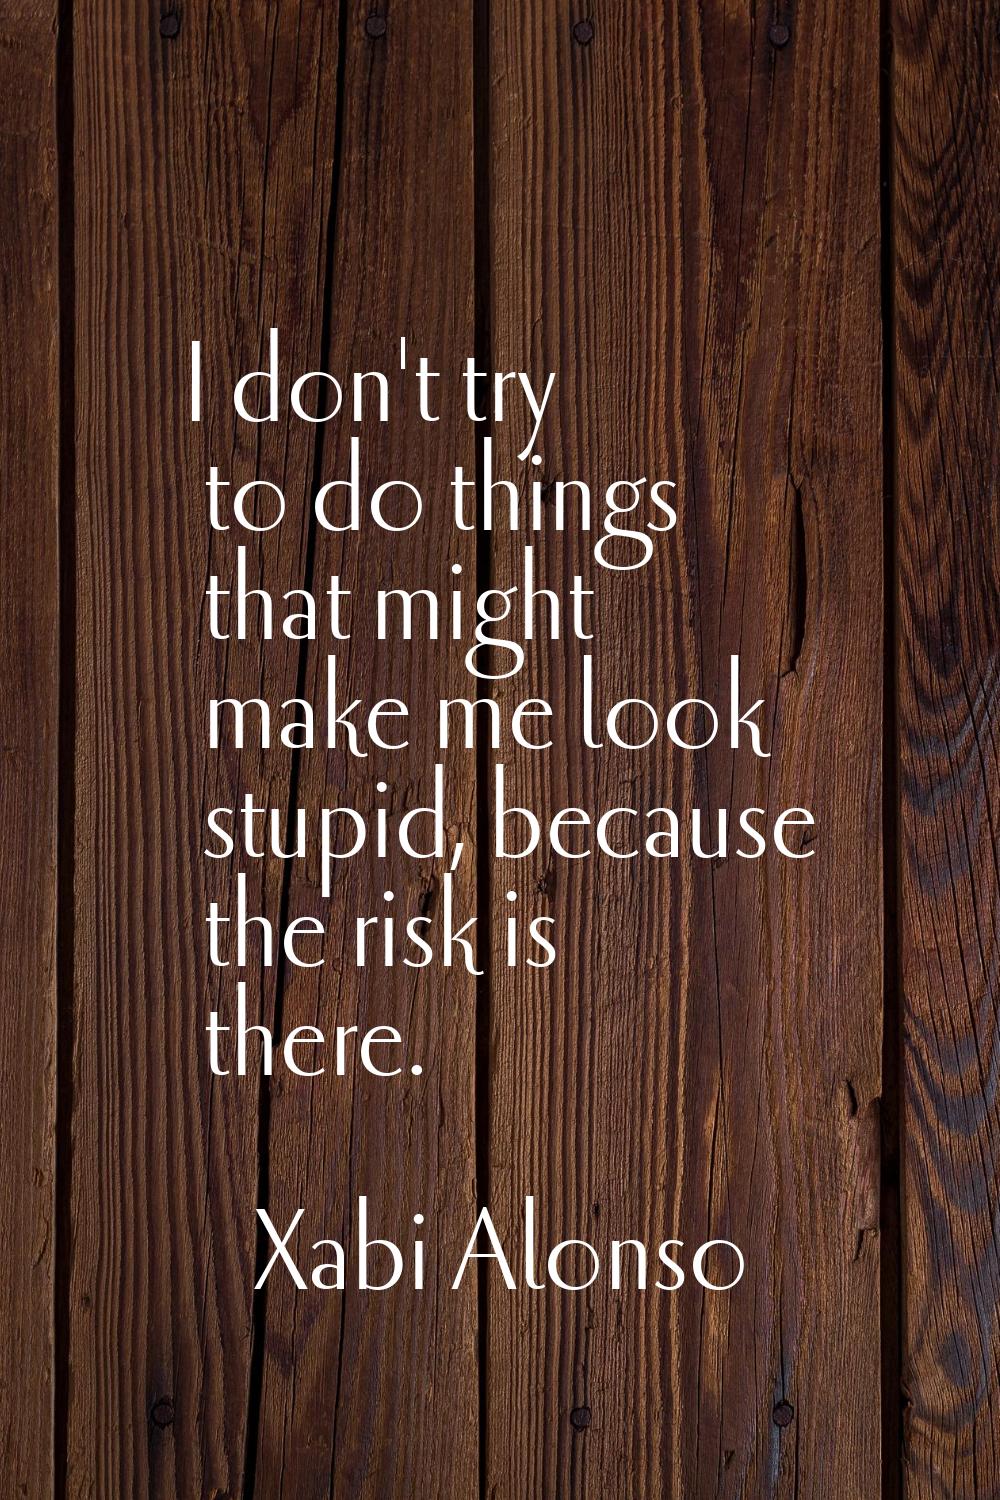 I don't try to do things that might make me look stupid, because the risk is there.